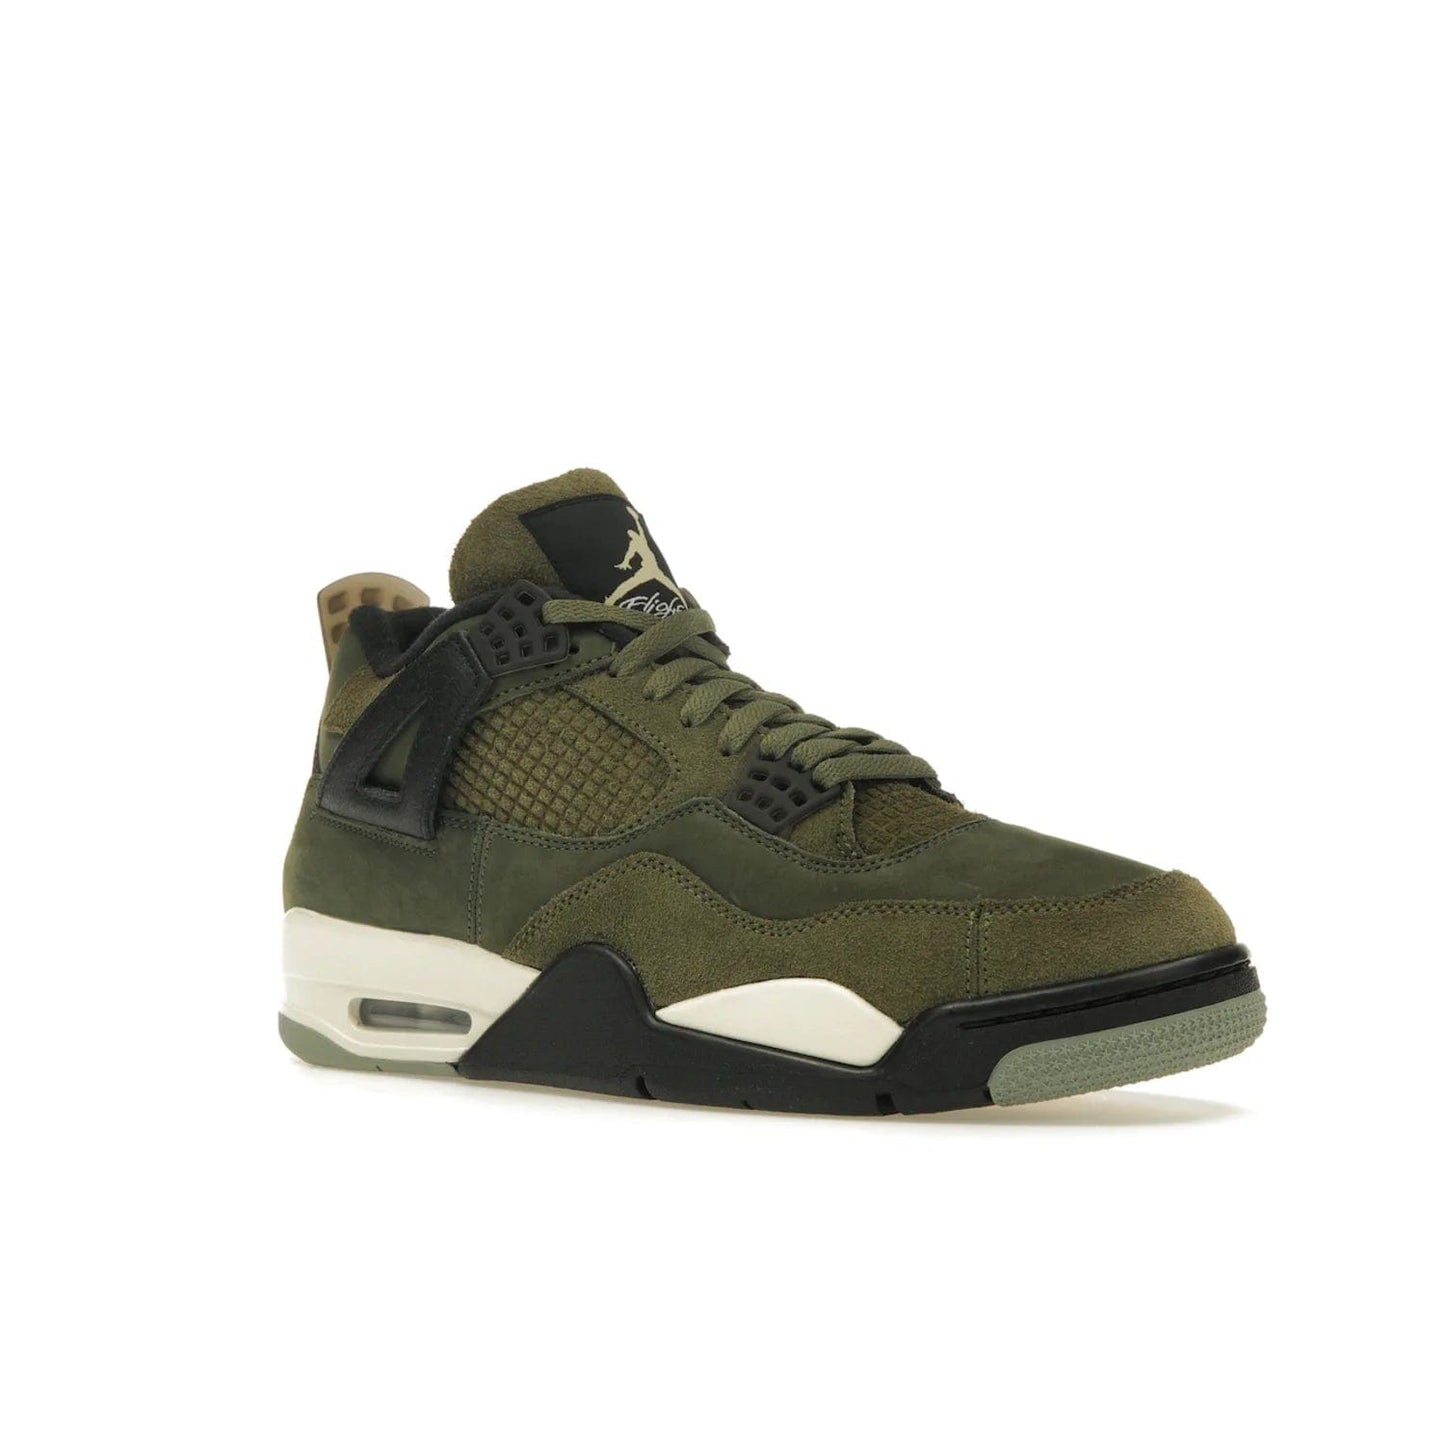 Jordan 4 Retro SE Craft Medium Olive - Image 5 - Only at www.BallersClubKickz.com - Grab the Jordan 4 Retro SE Crafts for a unique style. Combines Medium Olive, Pale Vanilla, Khaki, Black and Sail, with same classic shape, cushioning, and rubber outsole. Available on November 18th!